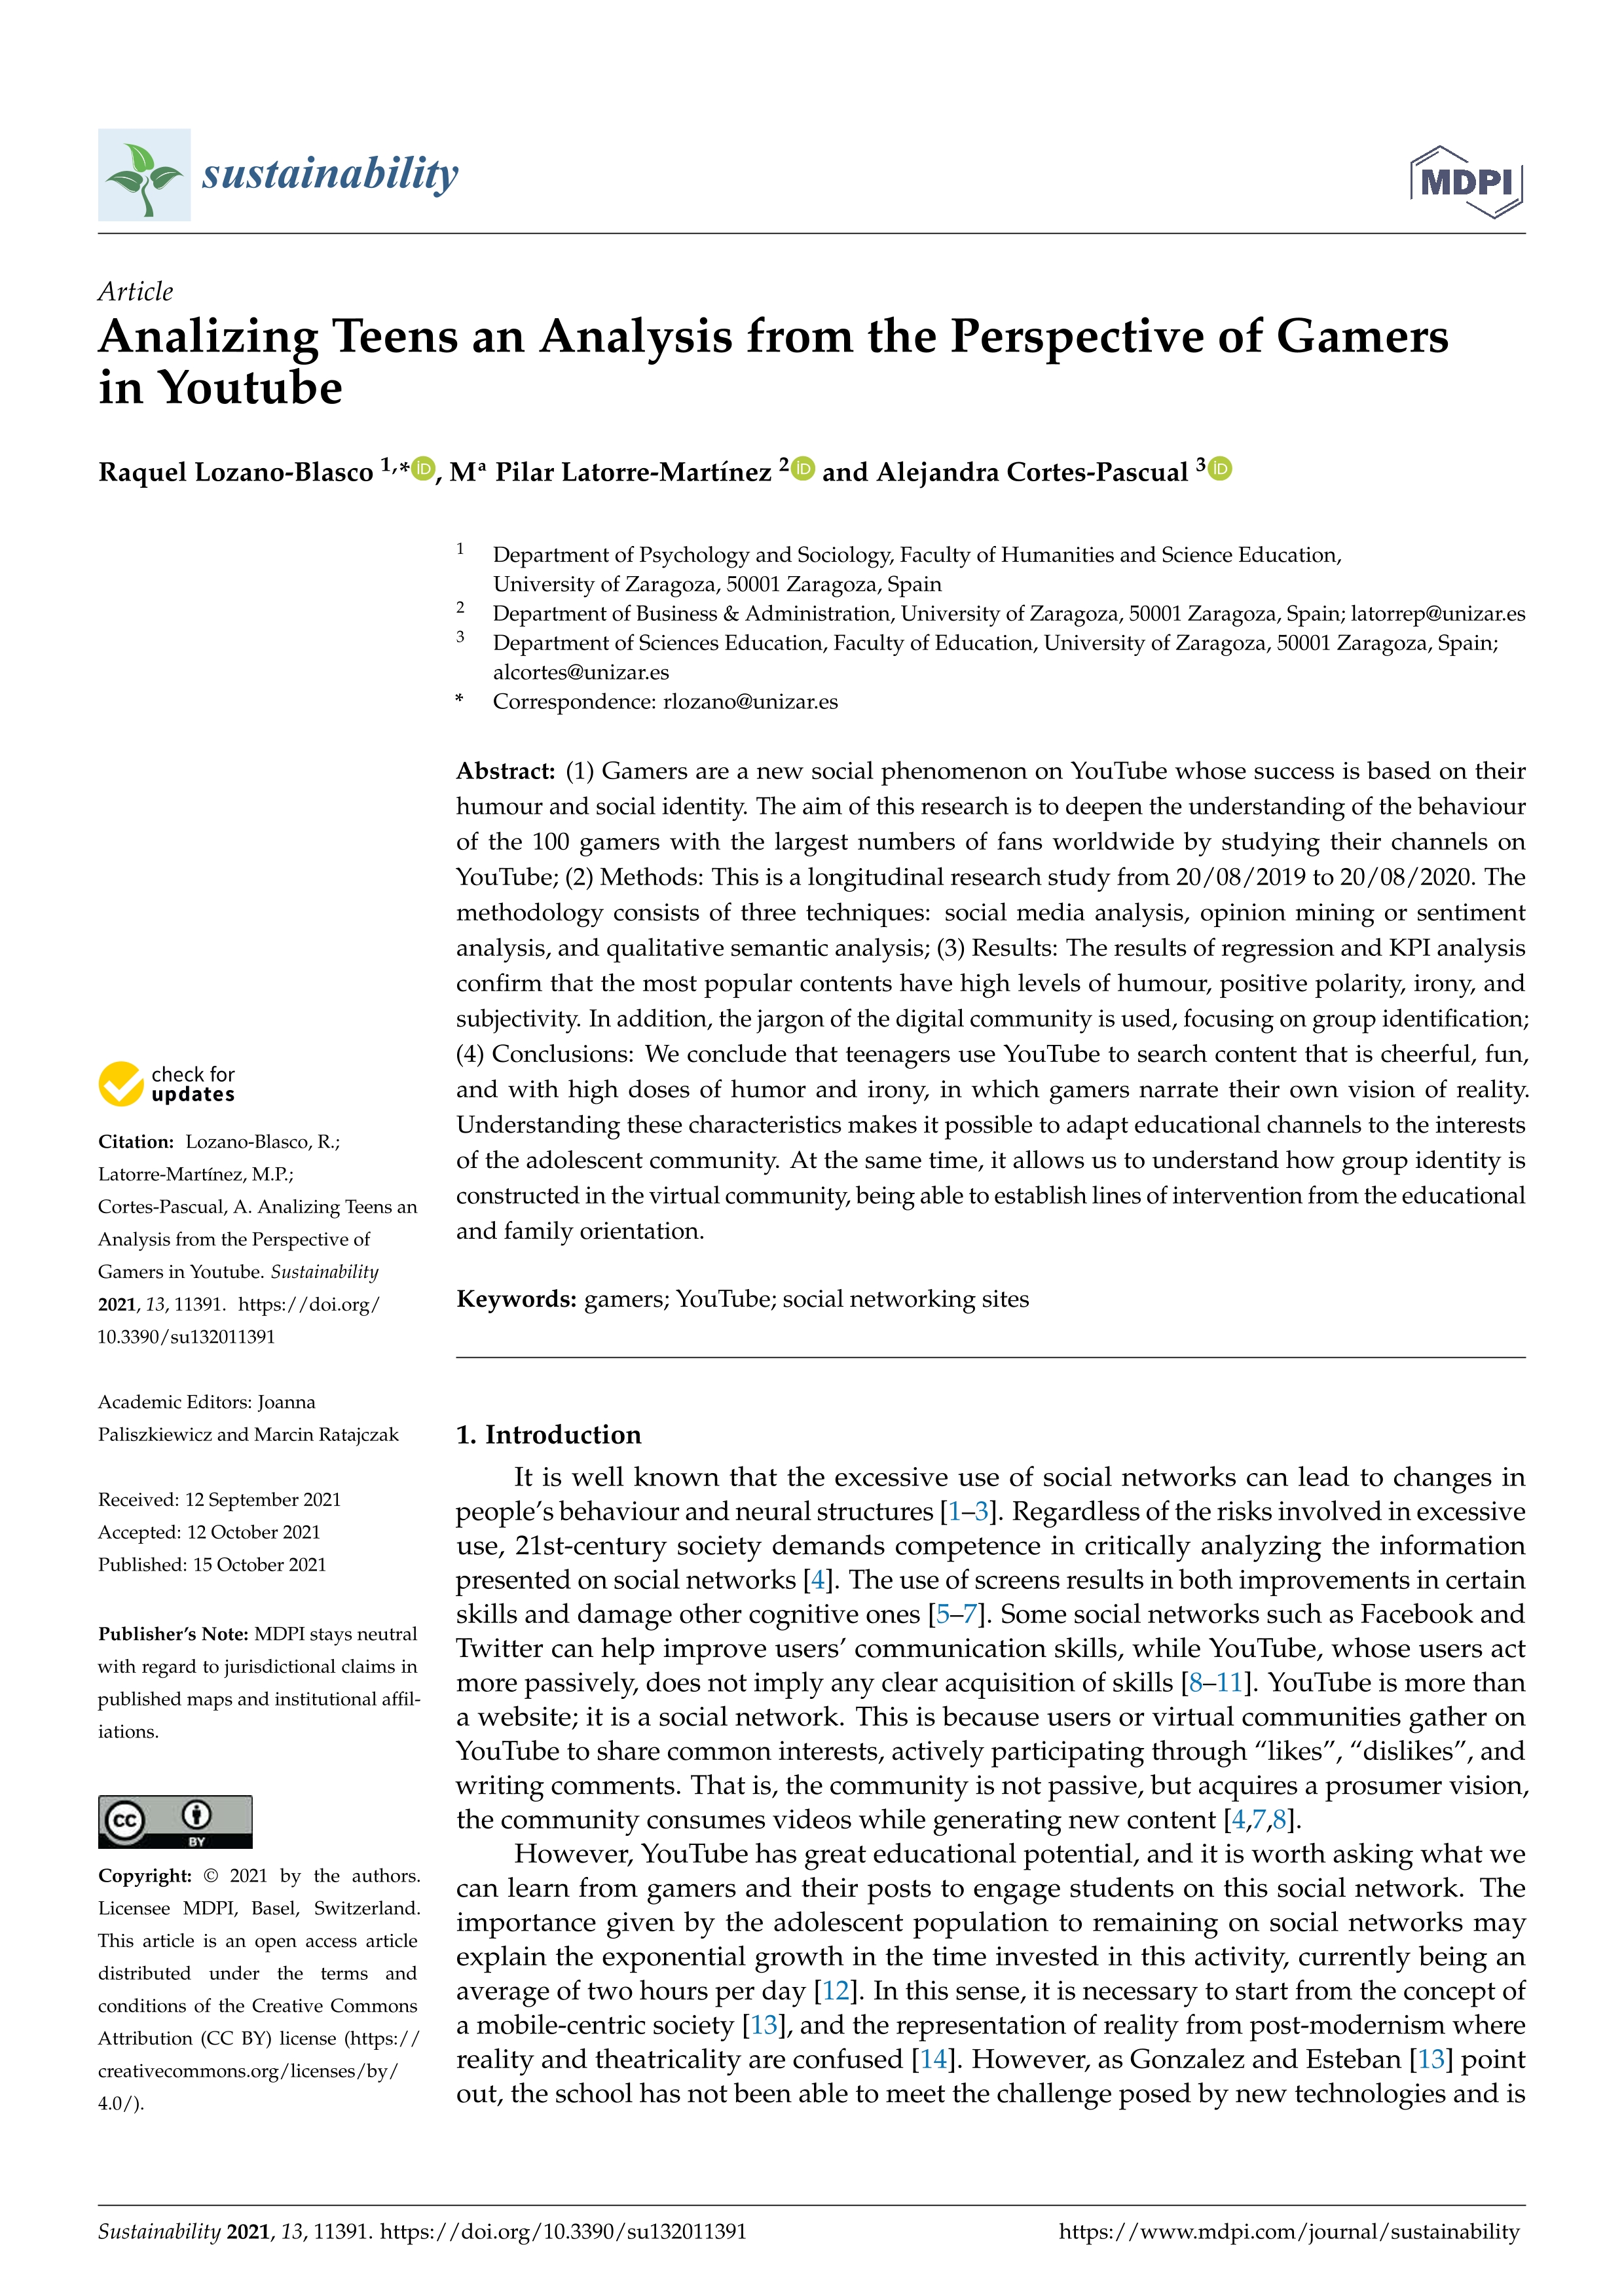 Analizing teens an analysis from the perspective of gamers in Youtube